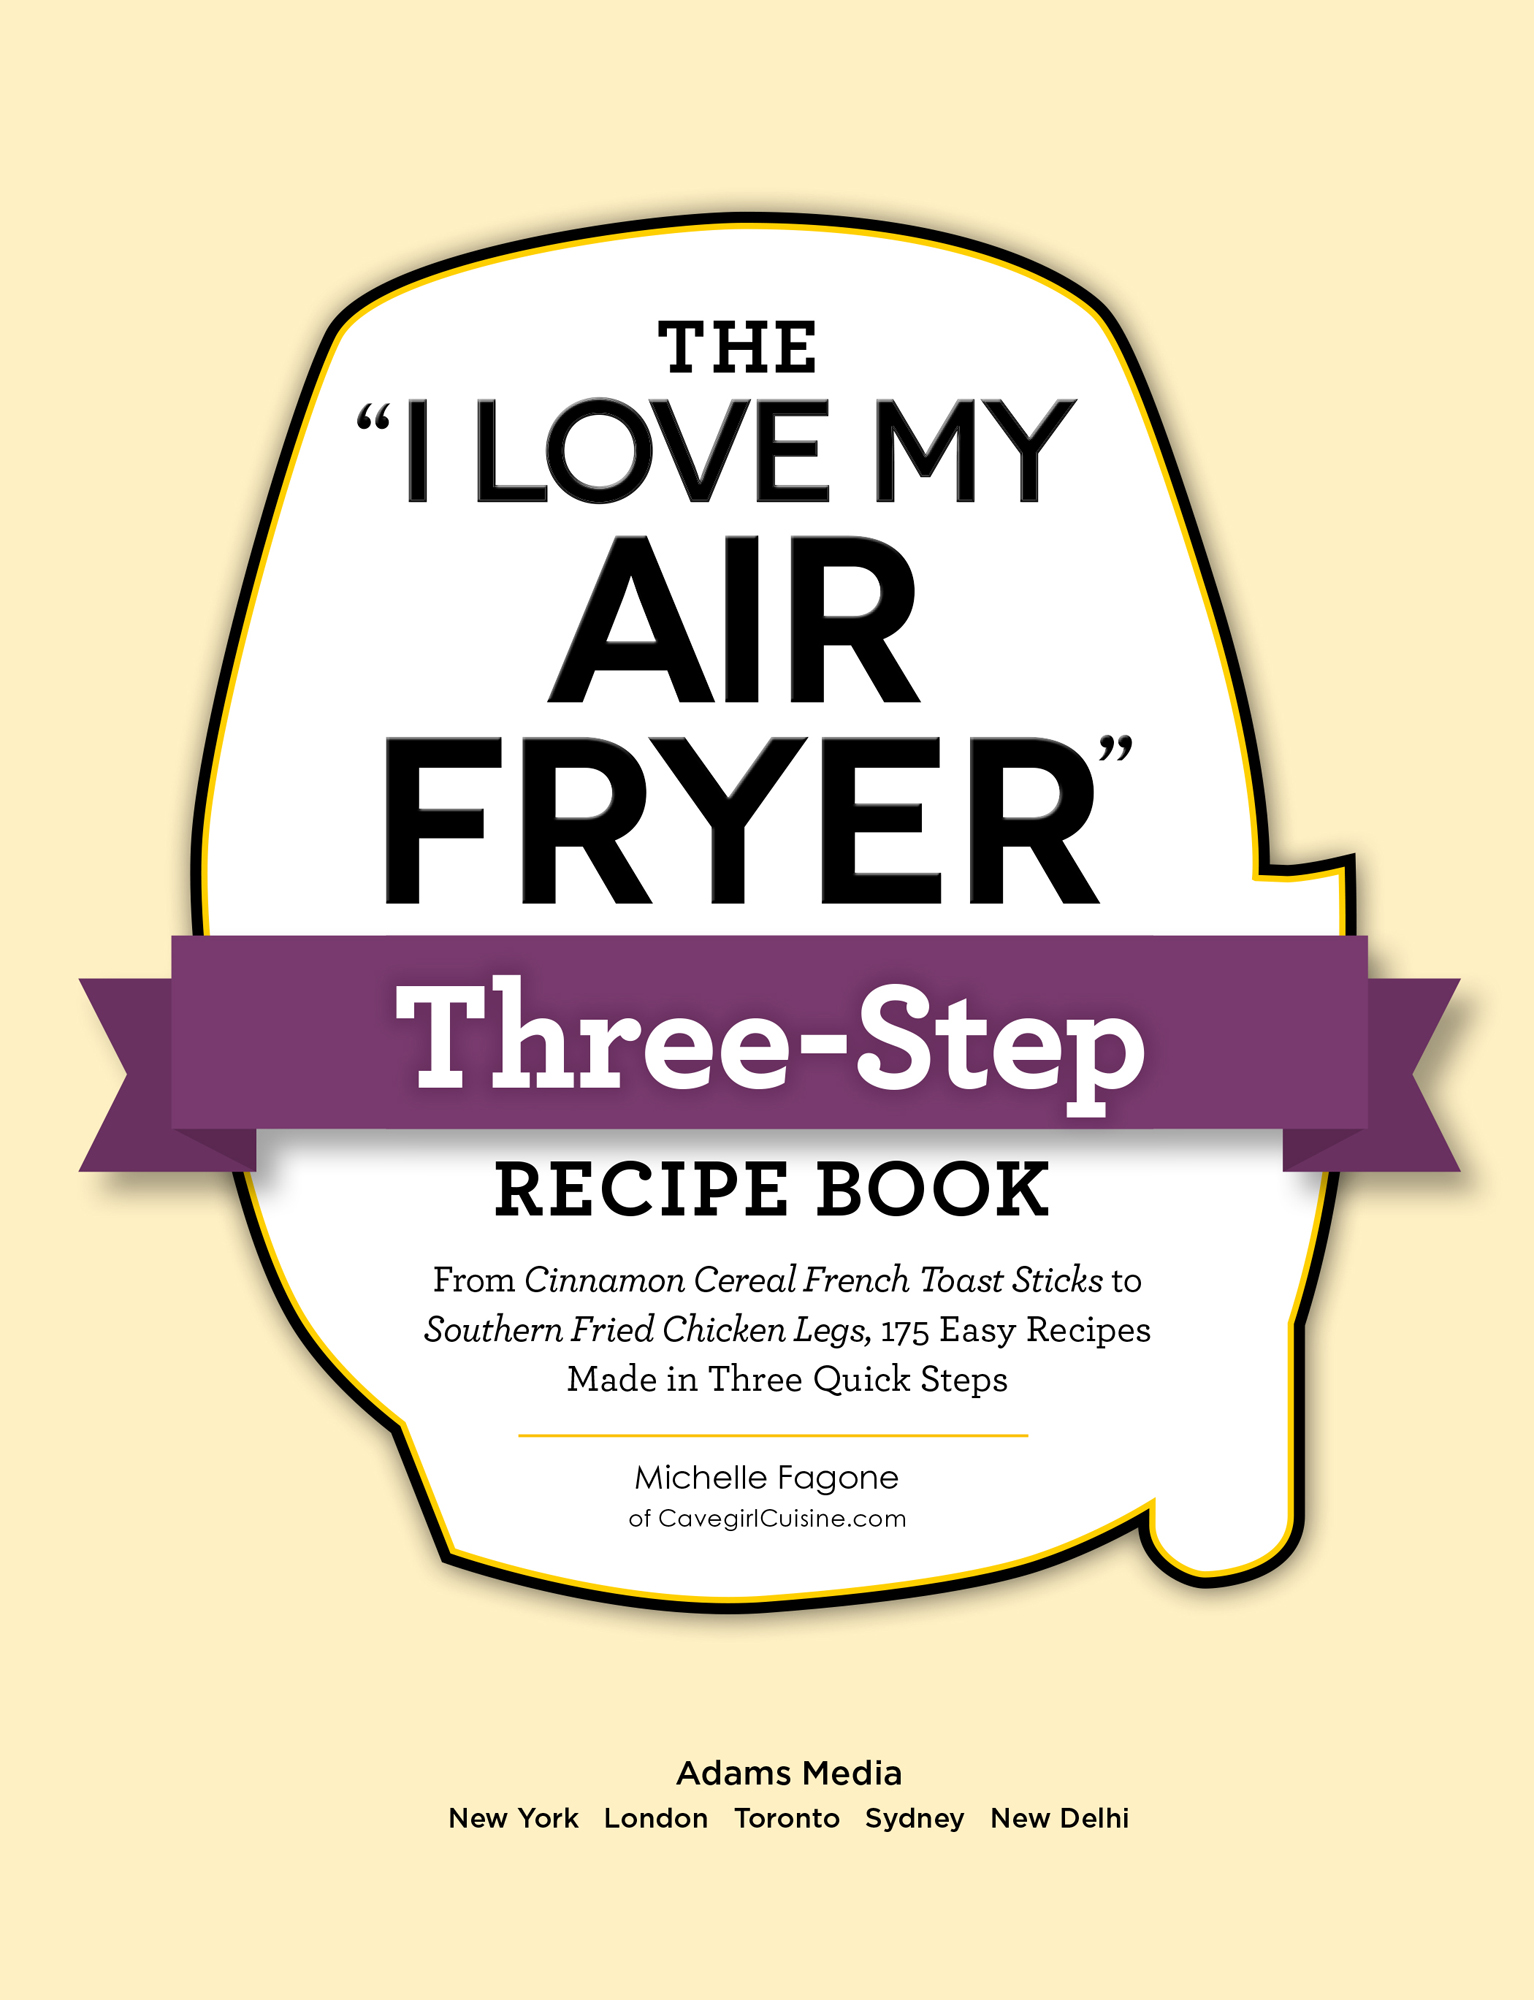 The I Love My Air Fryer Three-Step Recipe Book From Cinnamon Cereal French Toast Sticks to Southern Fried Chicken Legs 175 Easy Recipes Made in Three Quick Steps - image 2